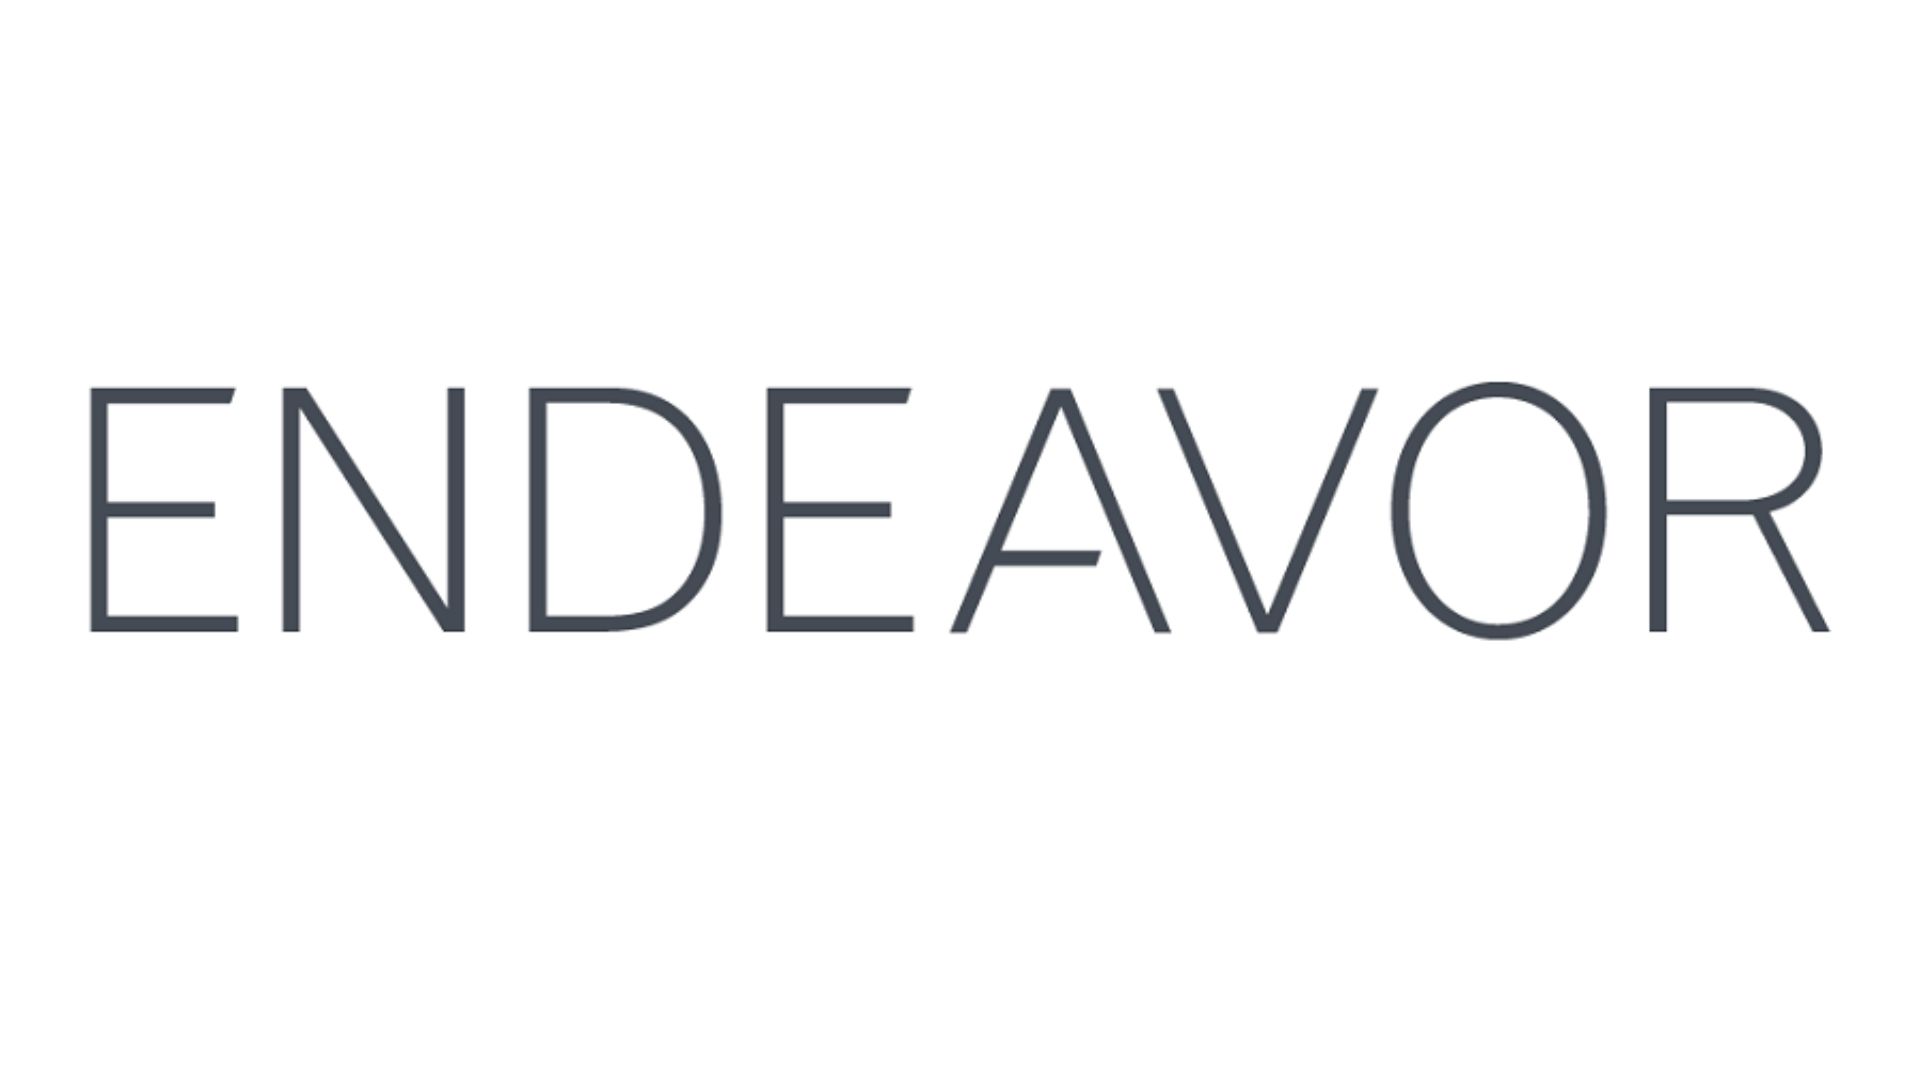 Silver Lake Leads Buyout of Endeavor, Supported by Mubadala and Dell Investments